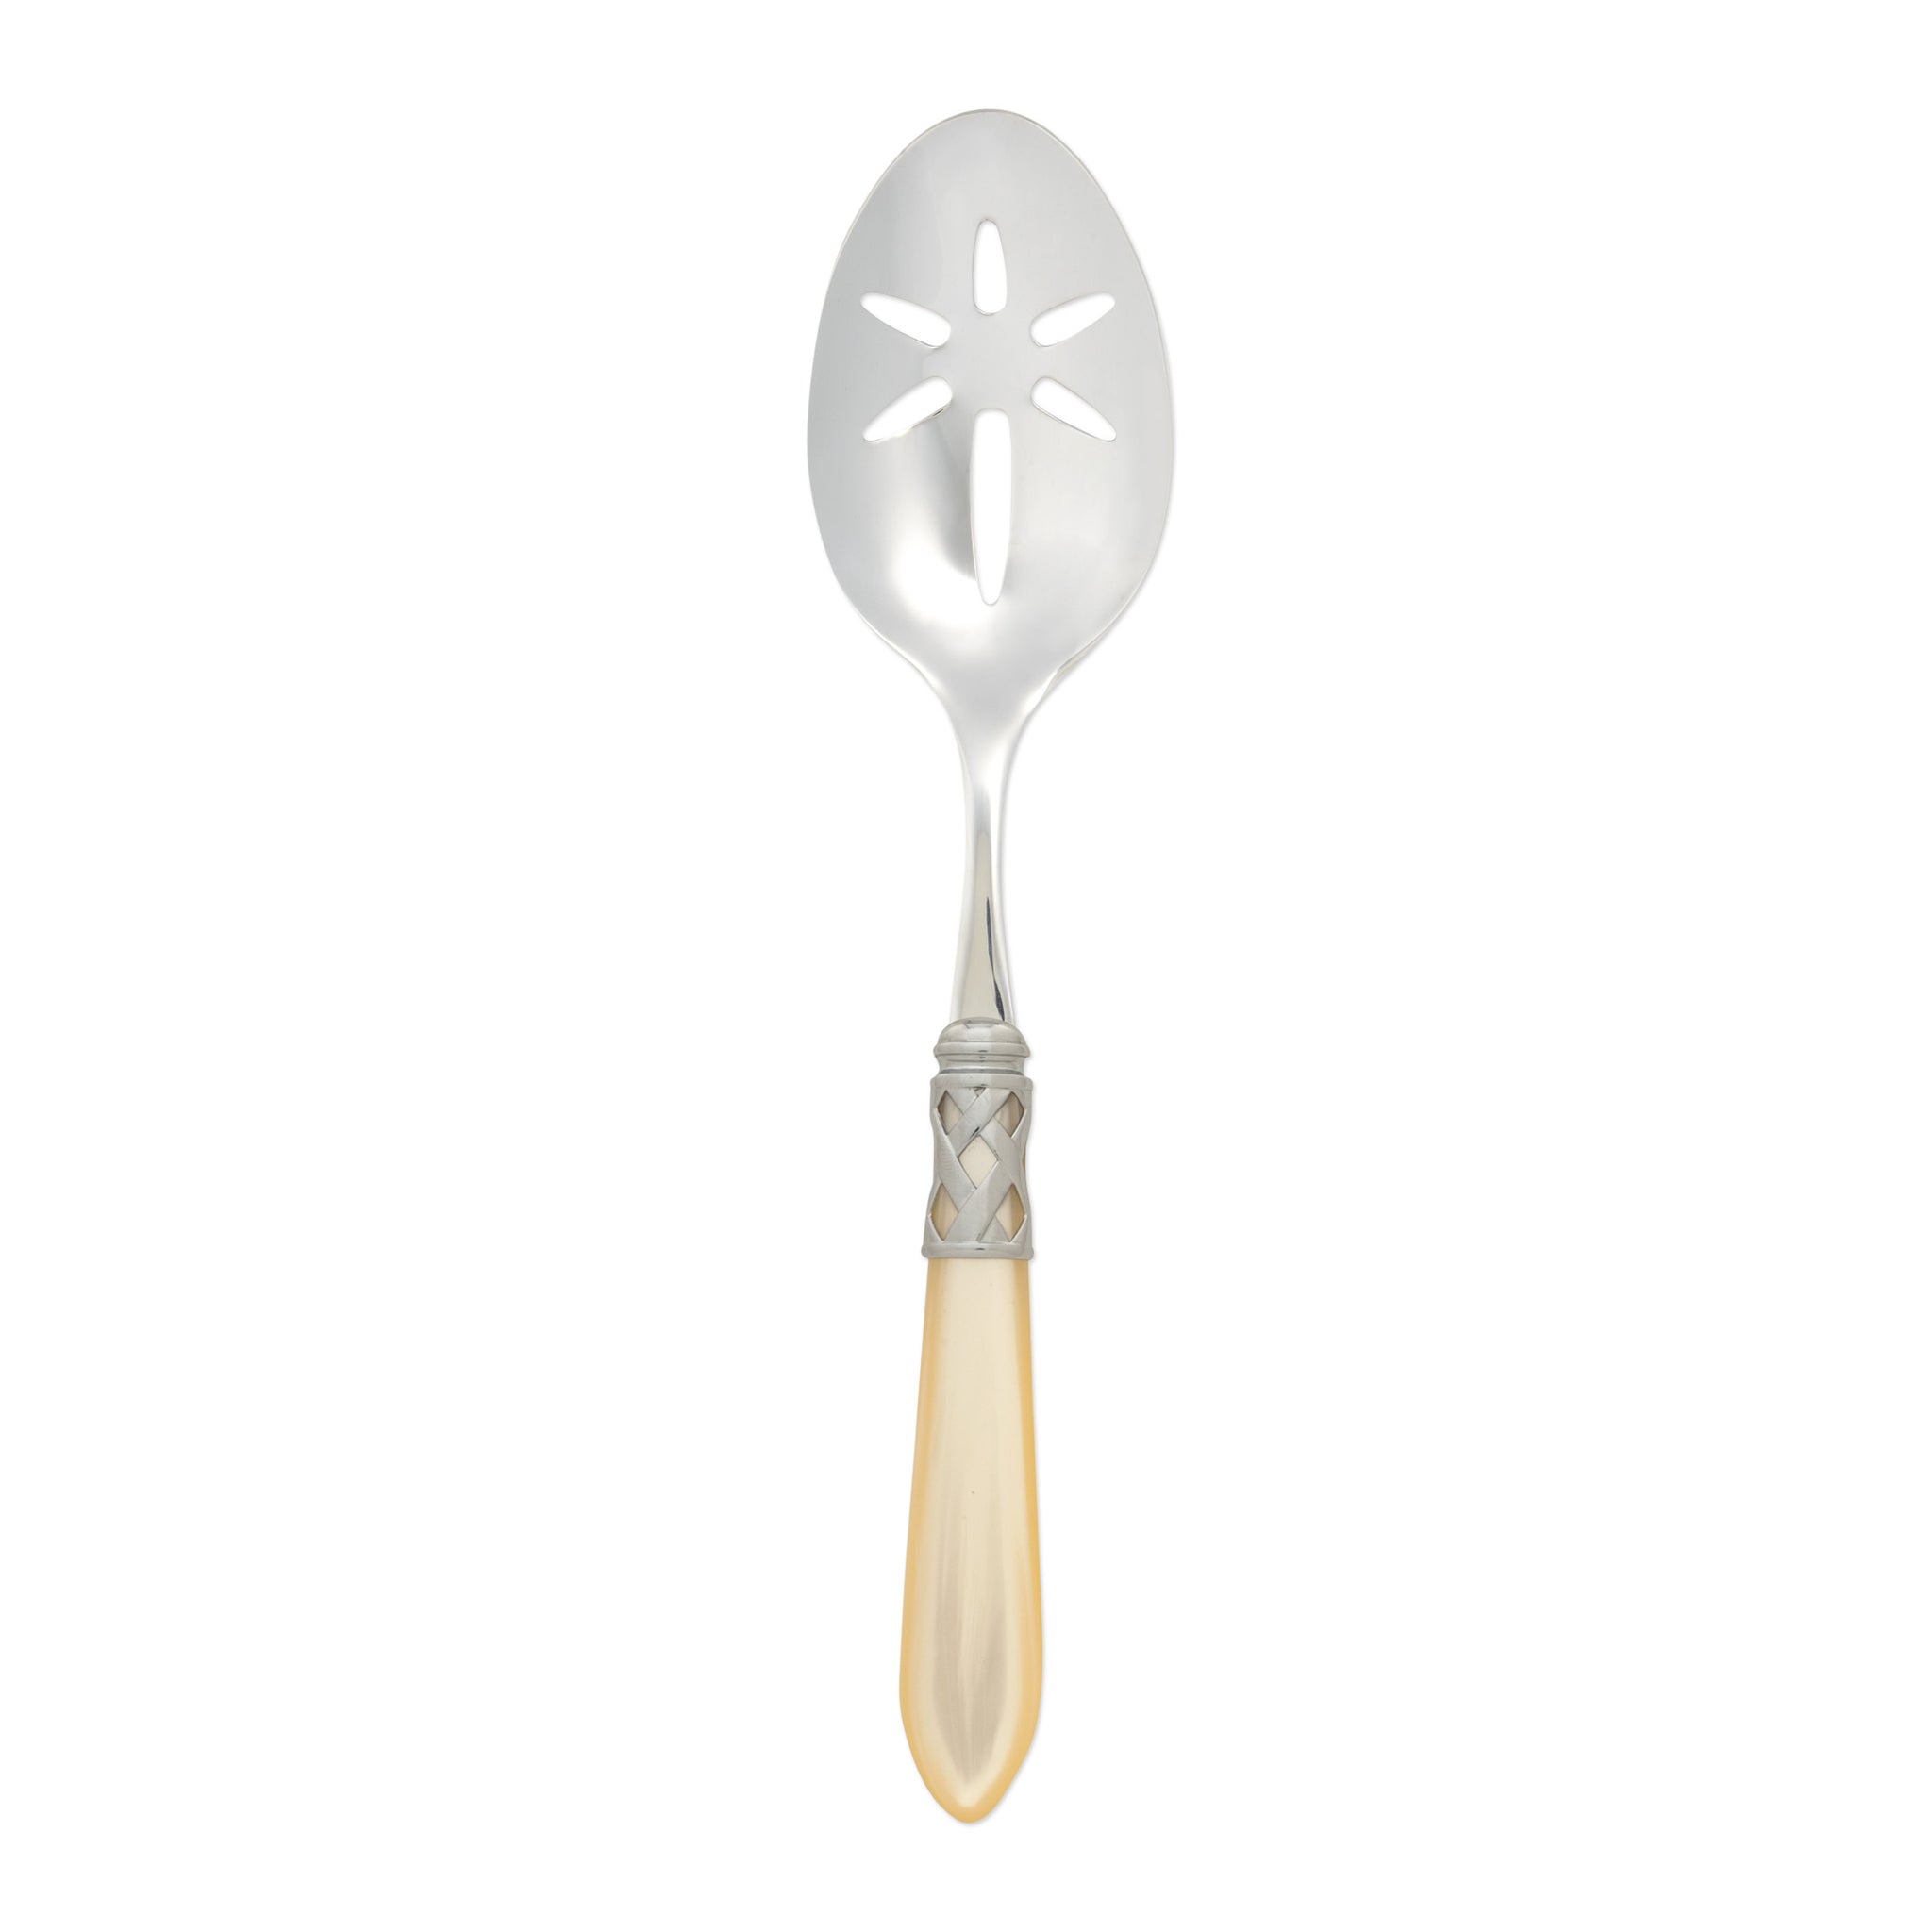 Aladdin Slotted Serving Spoon Antique - Ivory